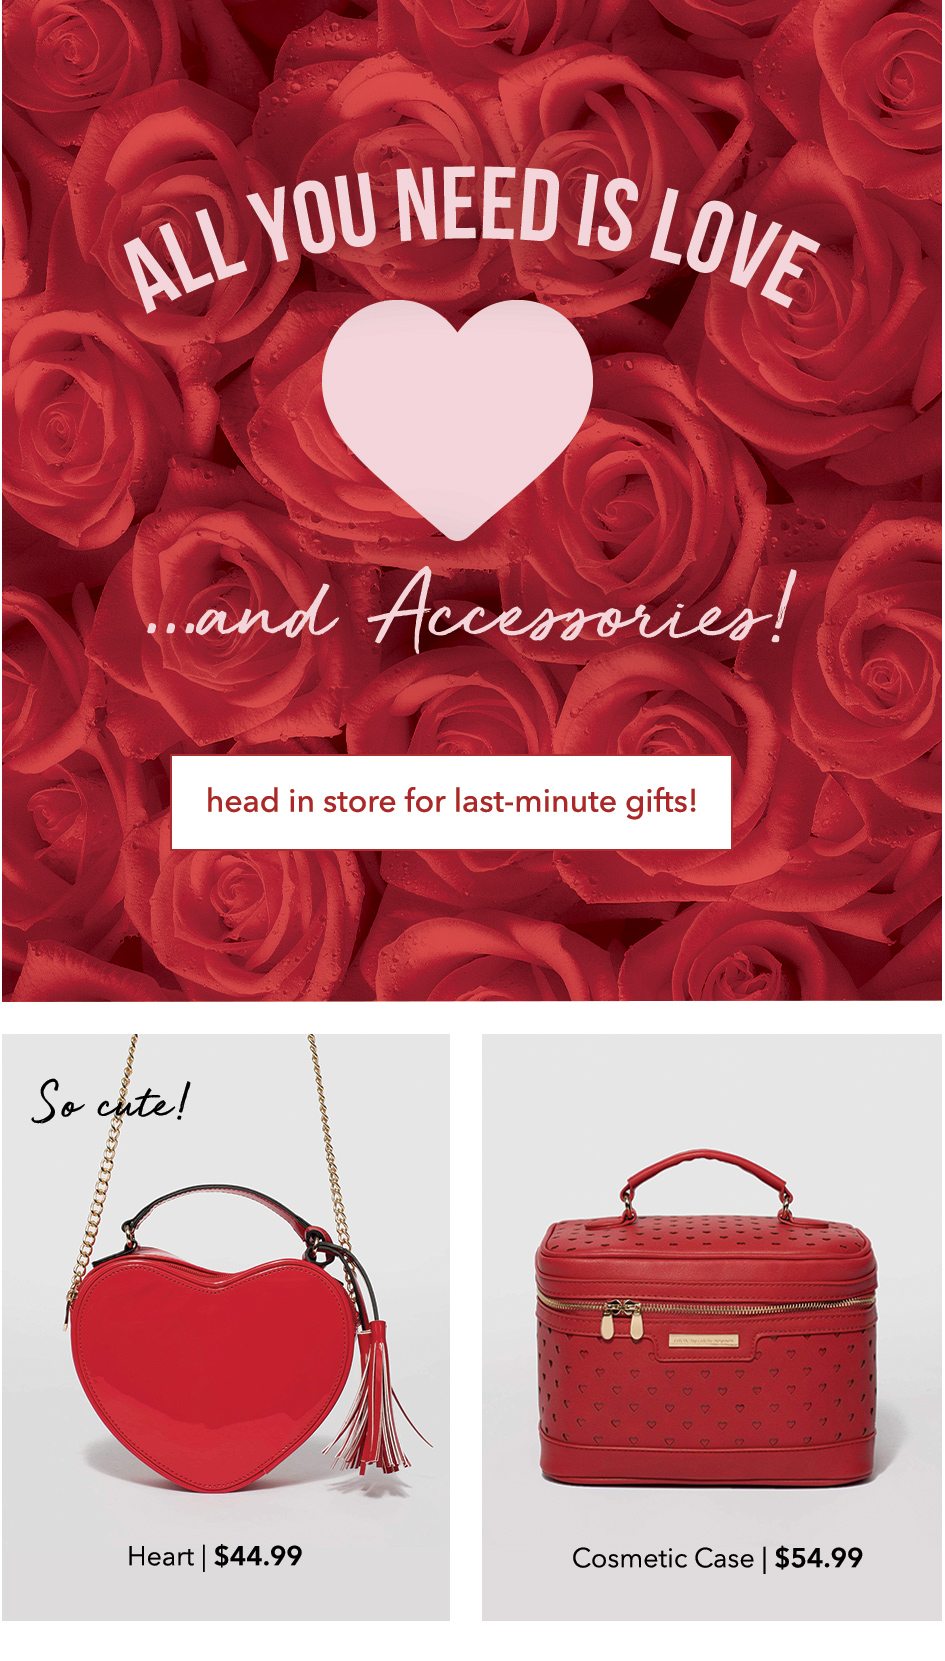 All You Need Is Love... And Accessories!